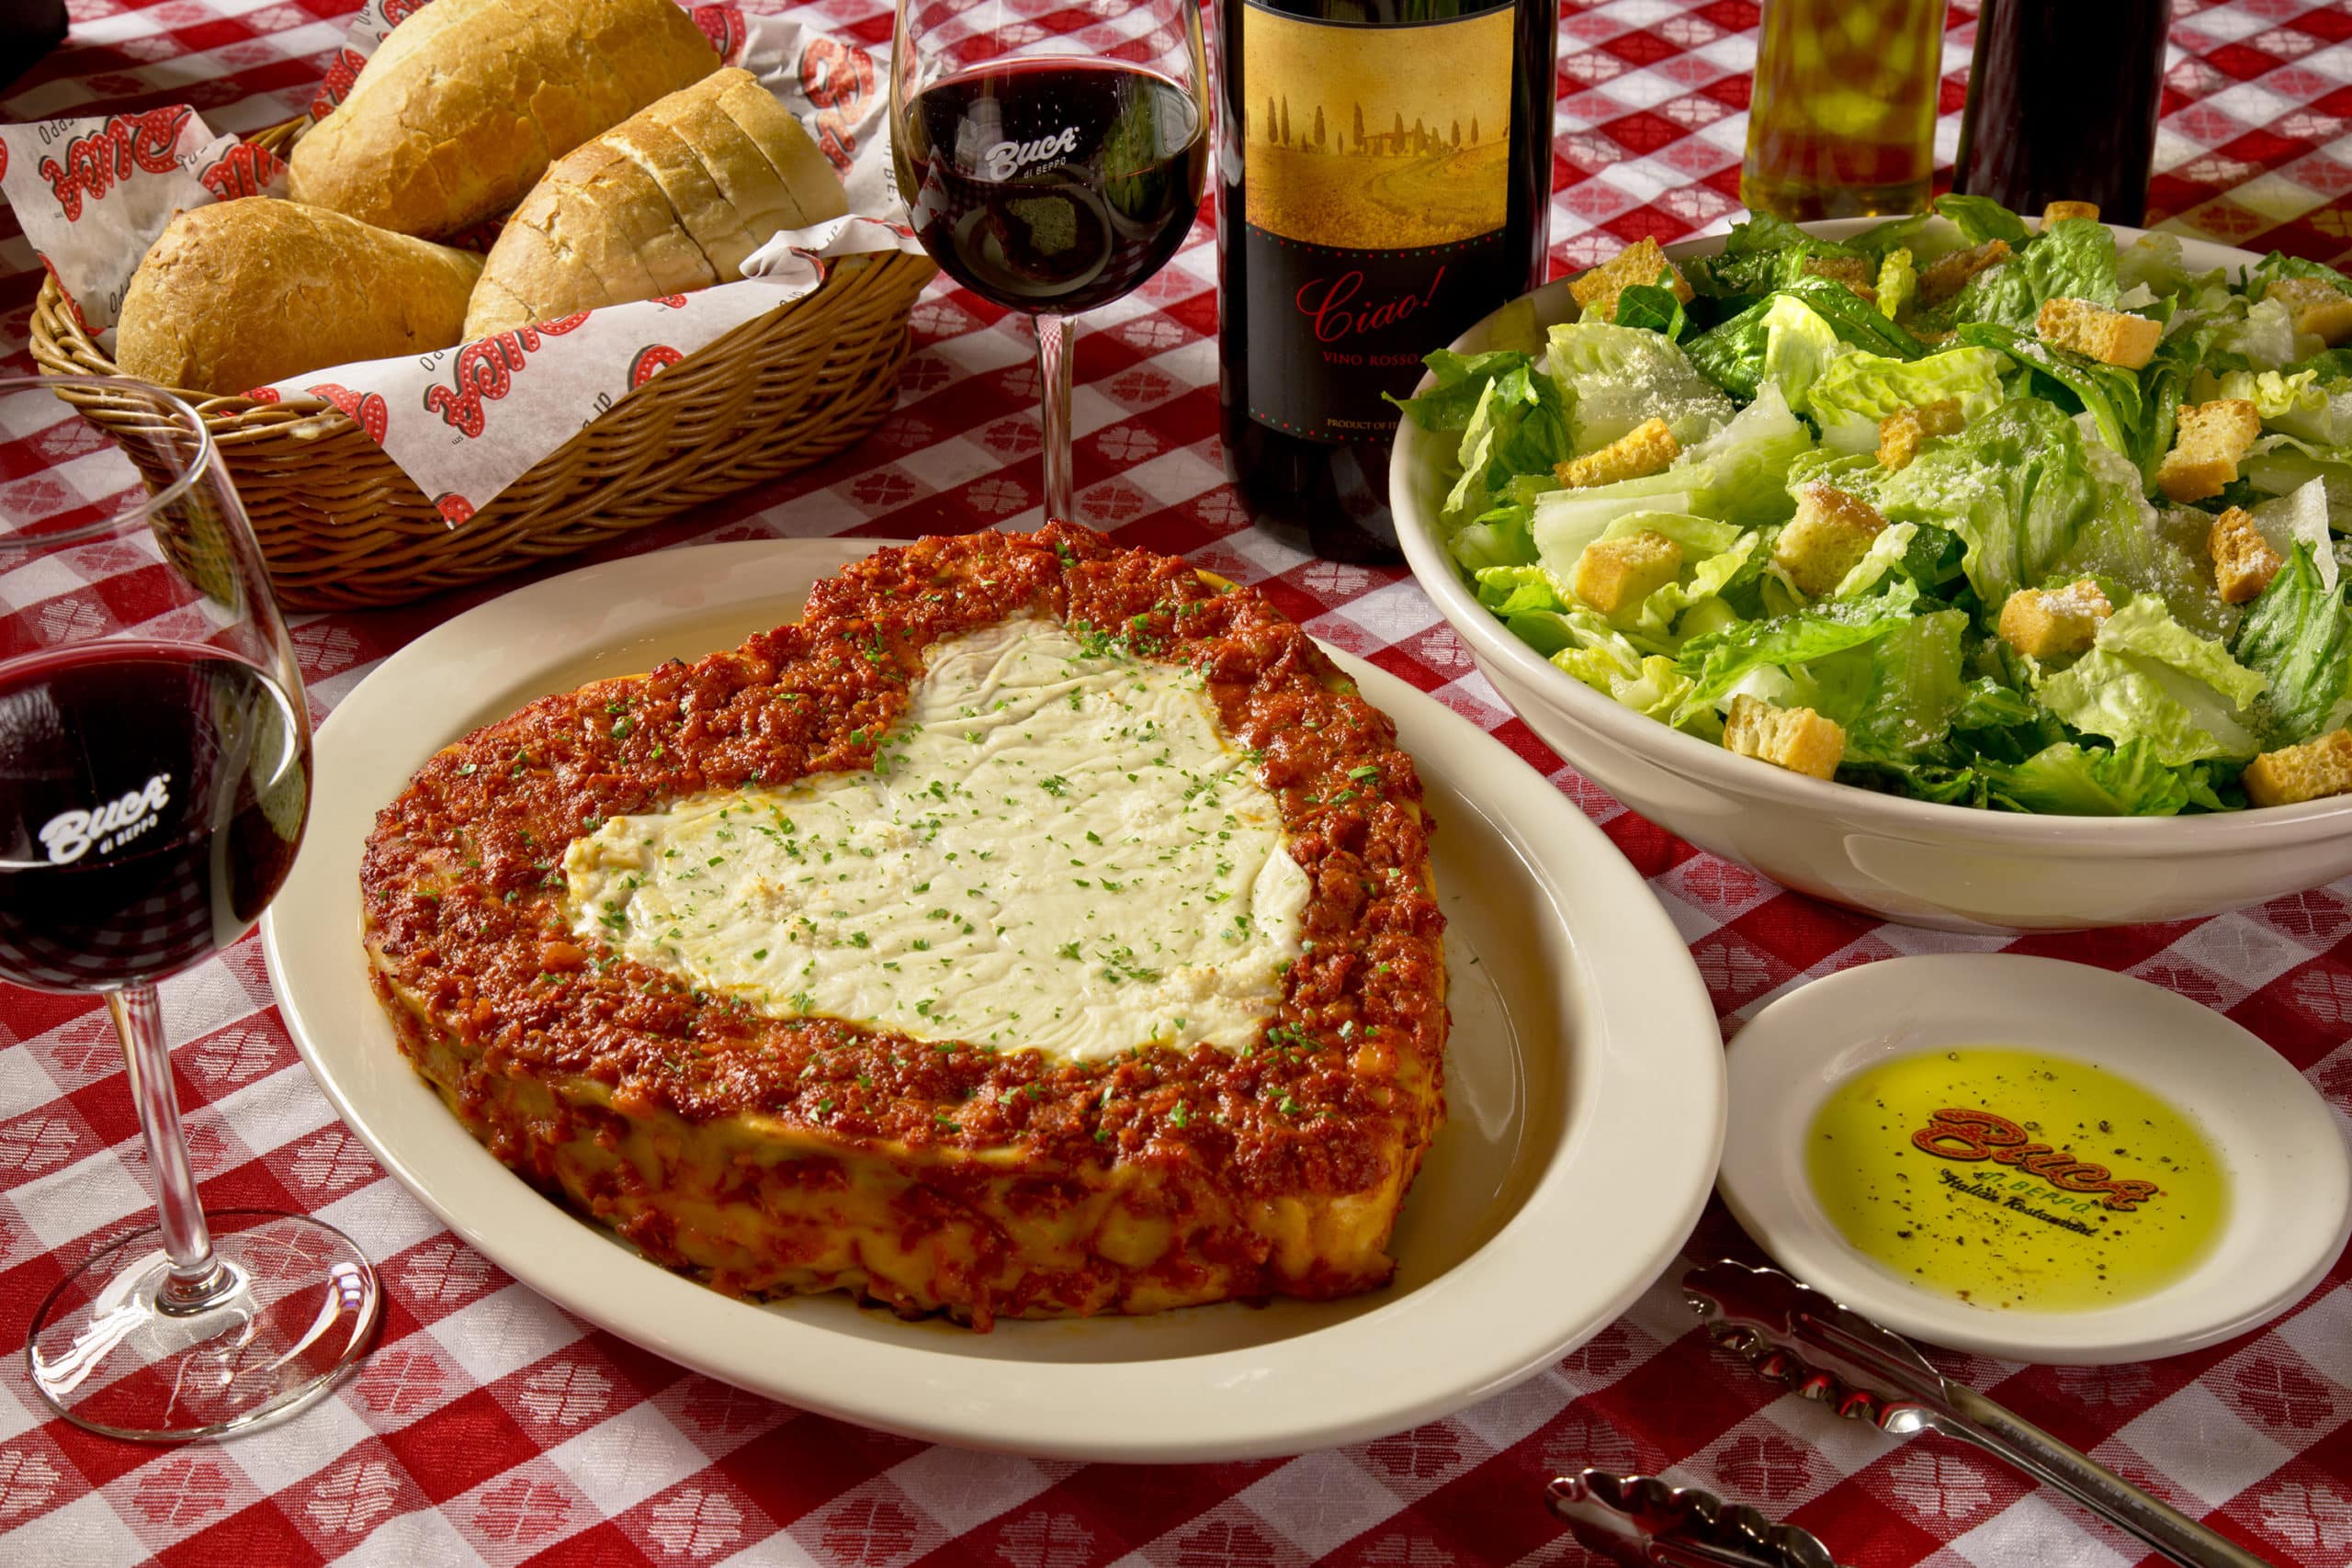 Share the Love with Buca di Beppo's Valentine's Day Heart-Shaped Lasagna